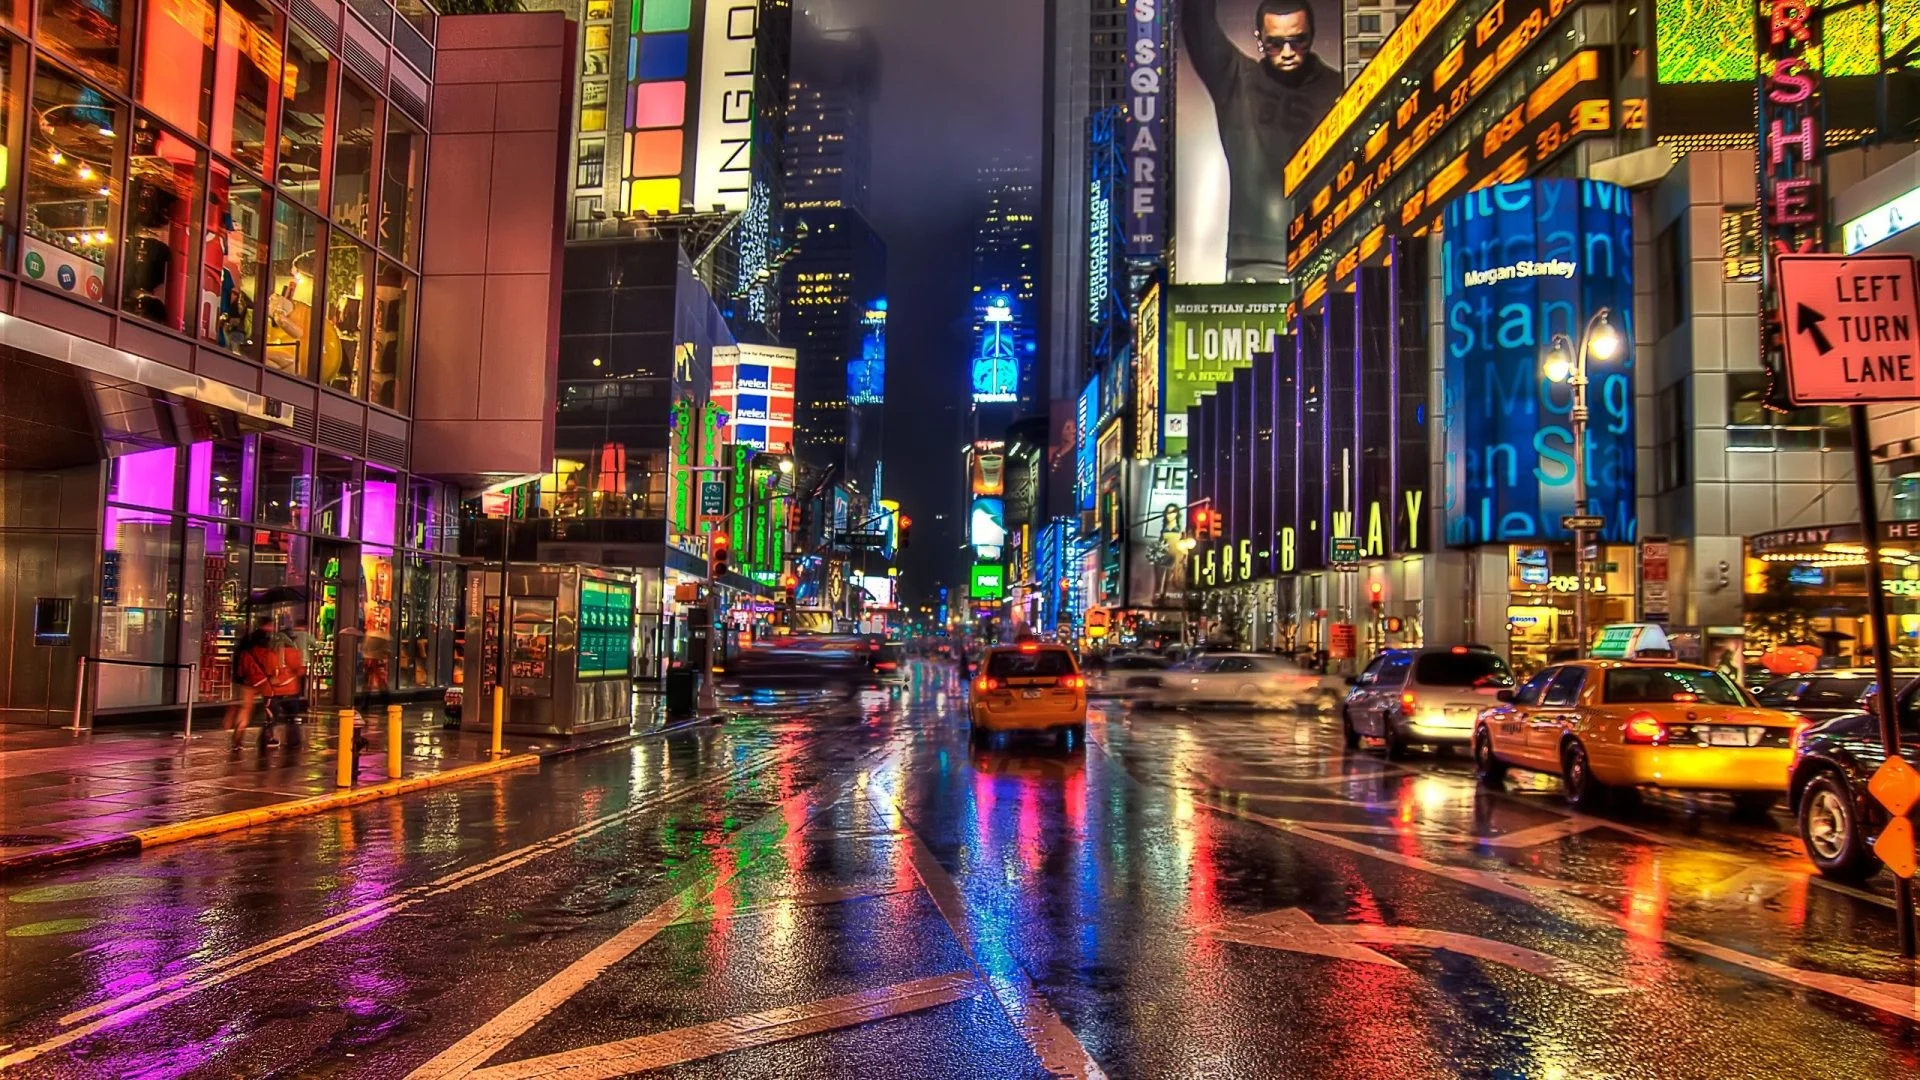 Skyscrapers – New York Colorful Light Peaceful Skyscrapers Walk Building Lights Night Alley Road Sky Colors